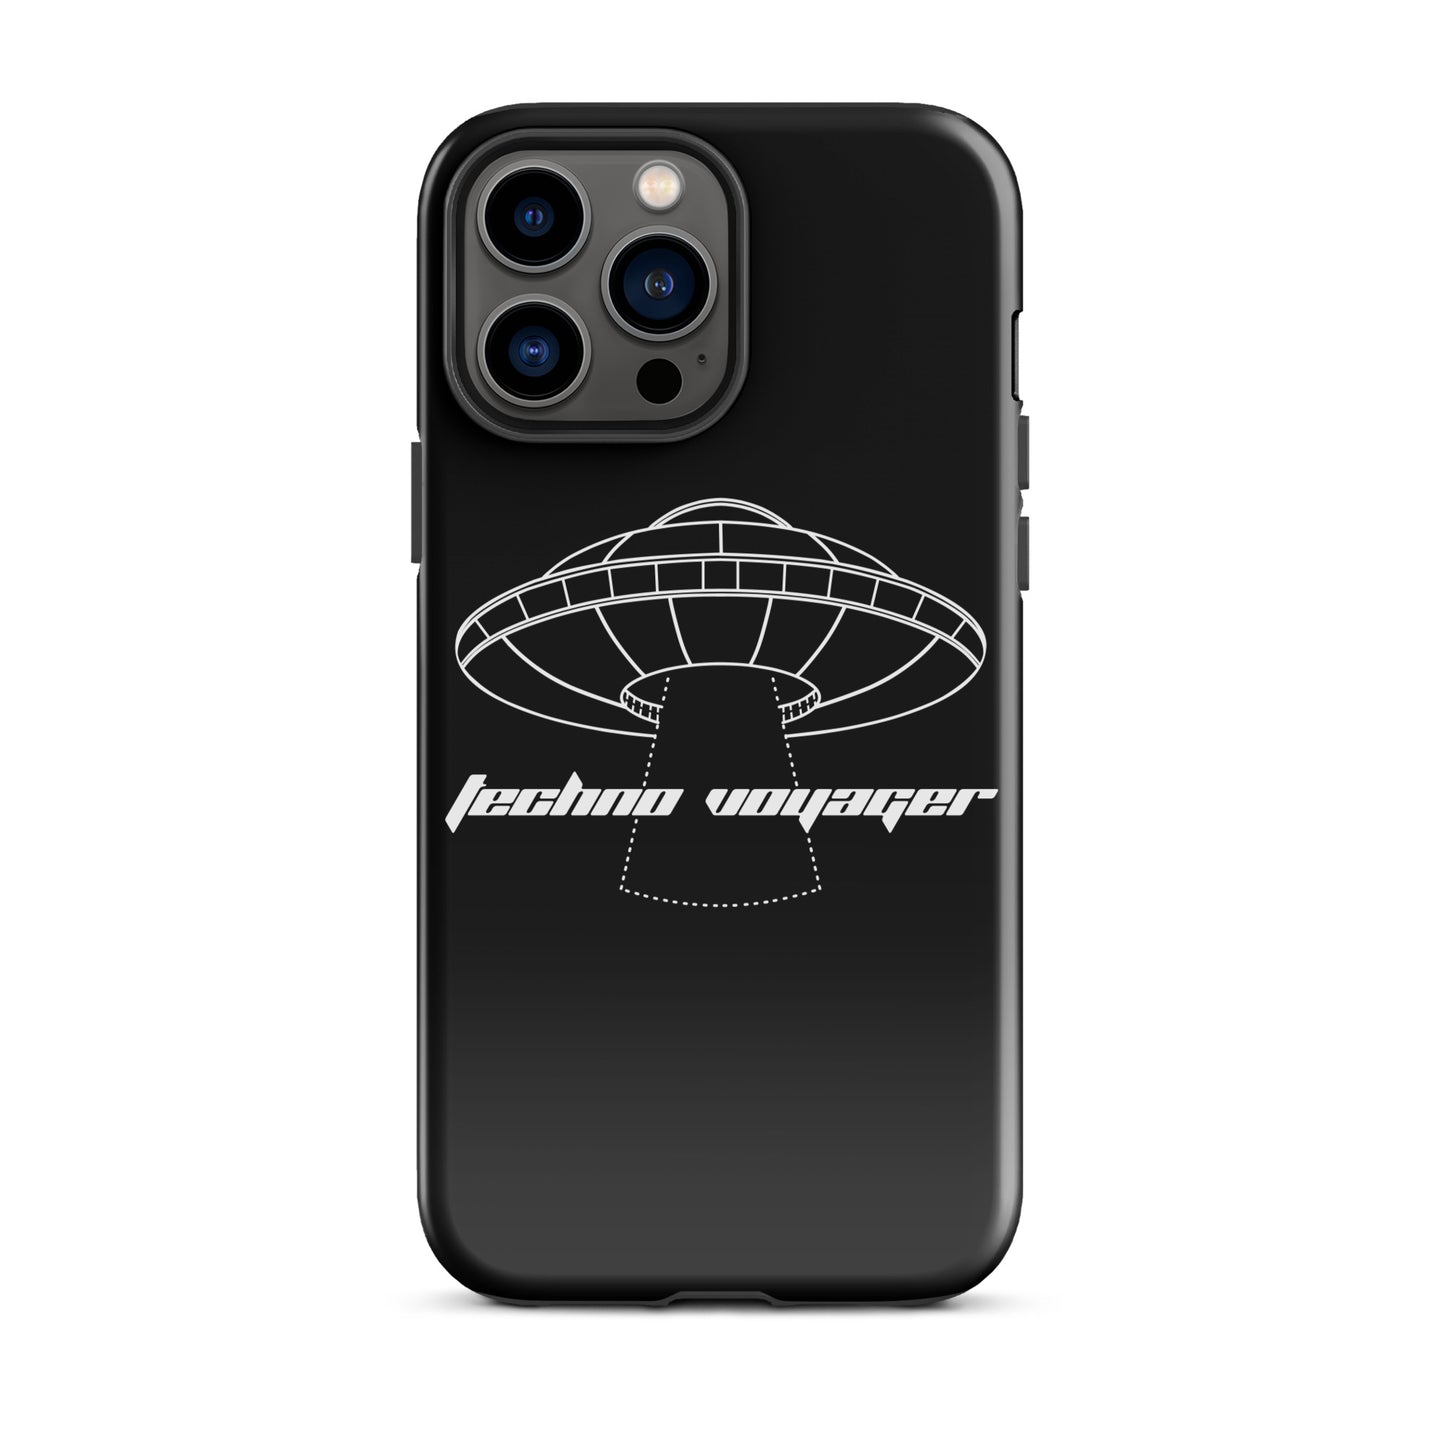 The 'OG-TECHNO-VOYAGER' iPhone Case